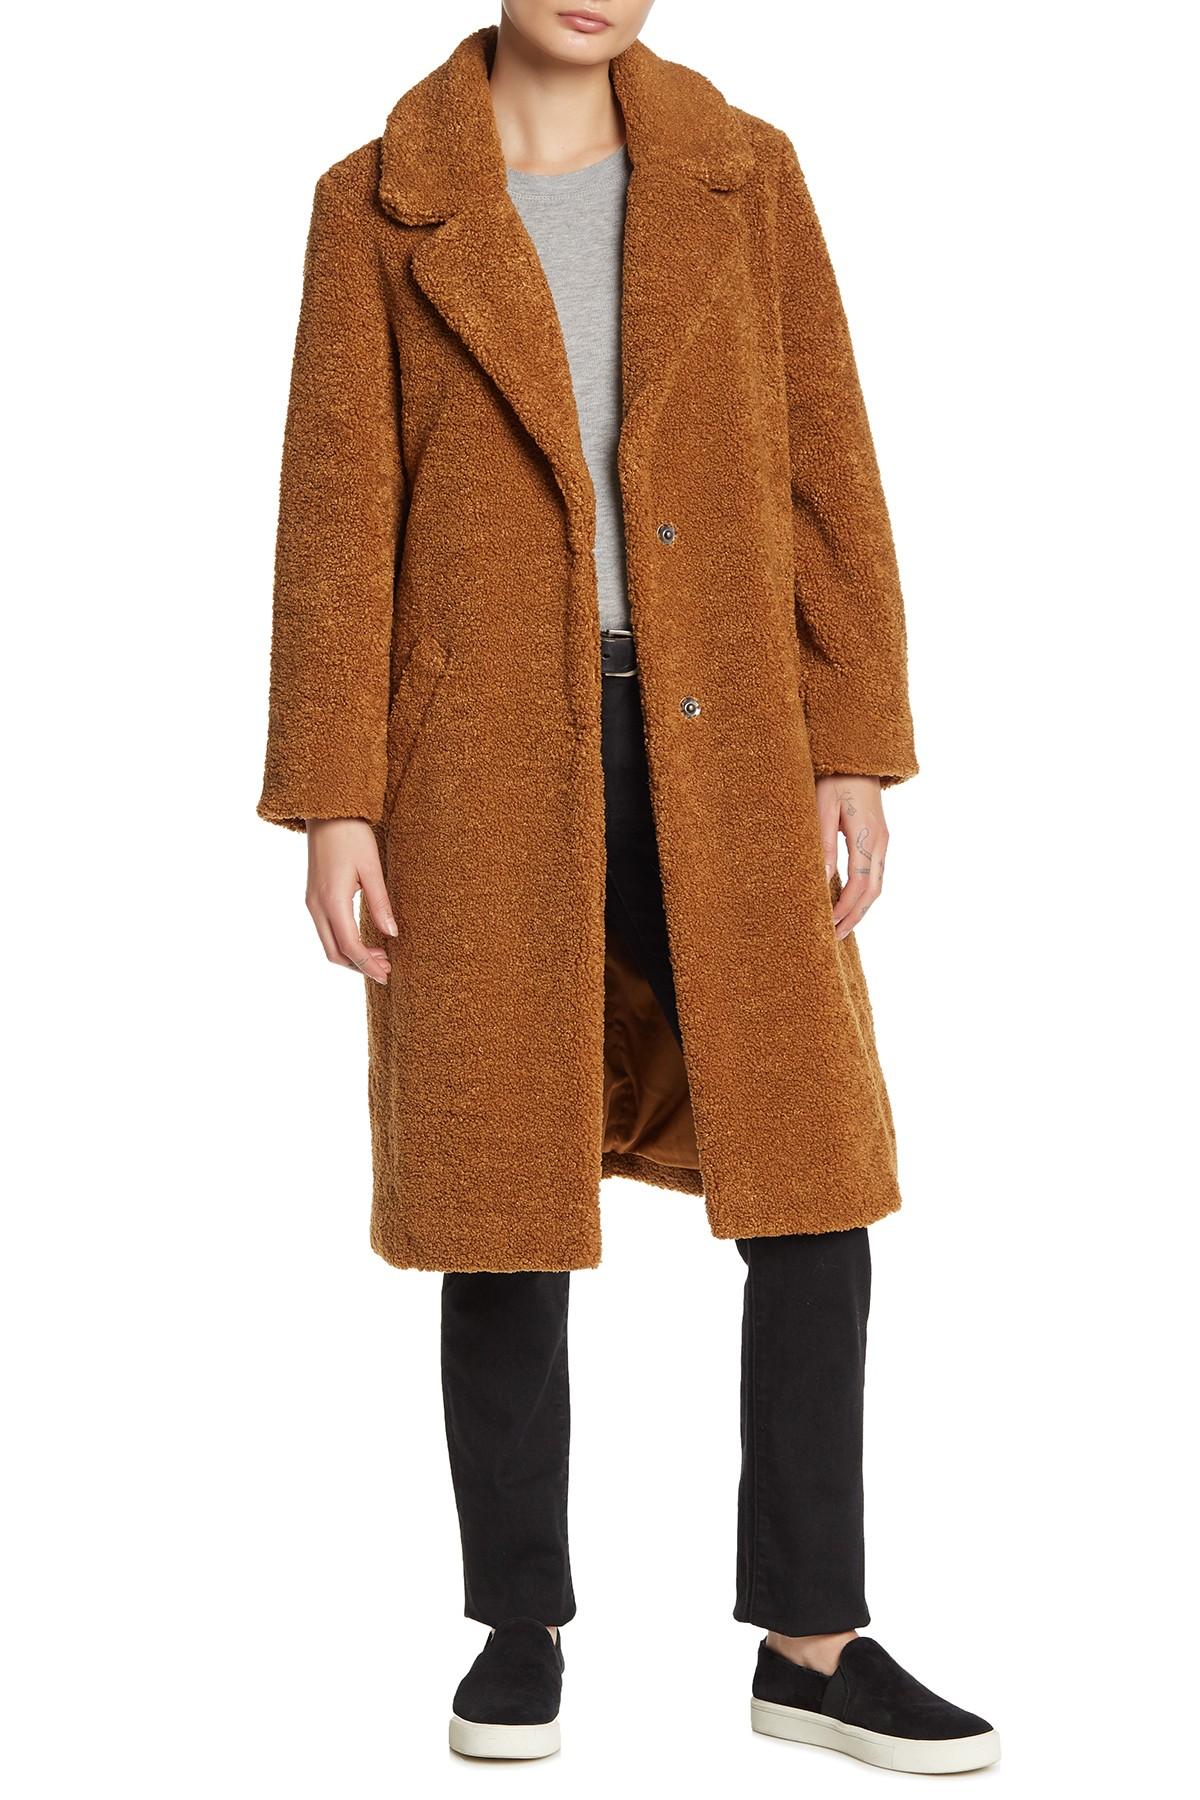 Lucky Brand Synthetic Missy Long Faux Shearling Teddy Coat in Toffee ...